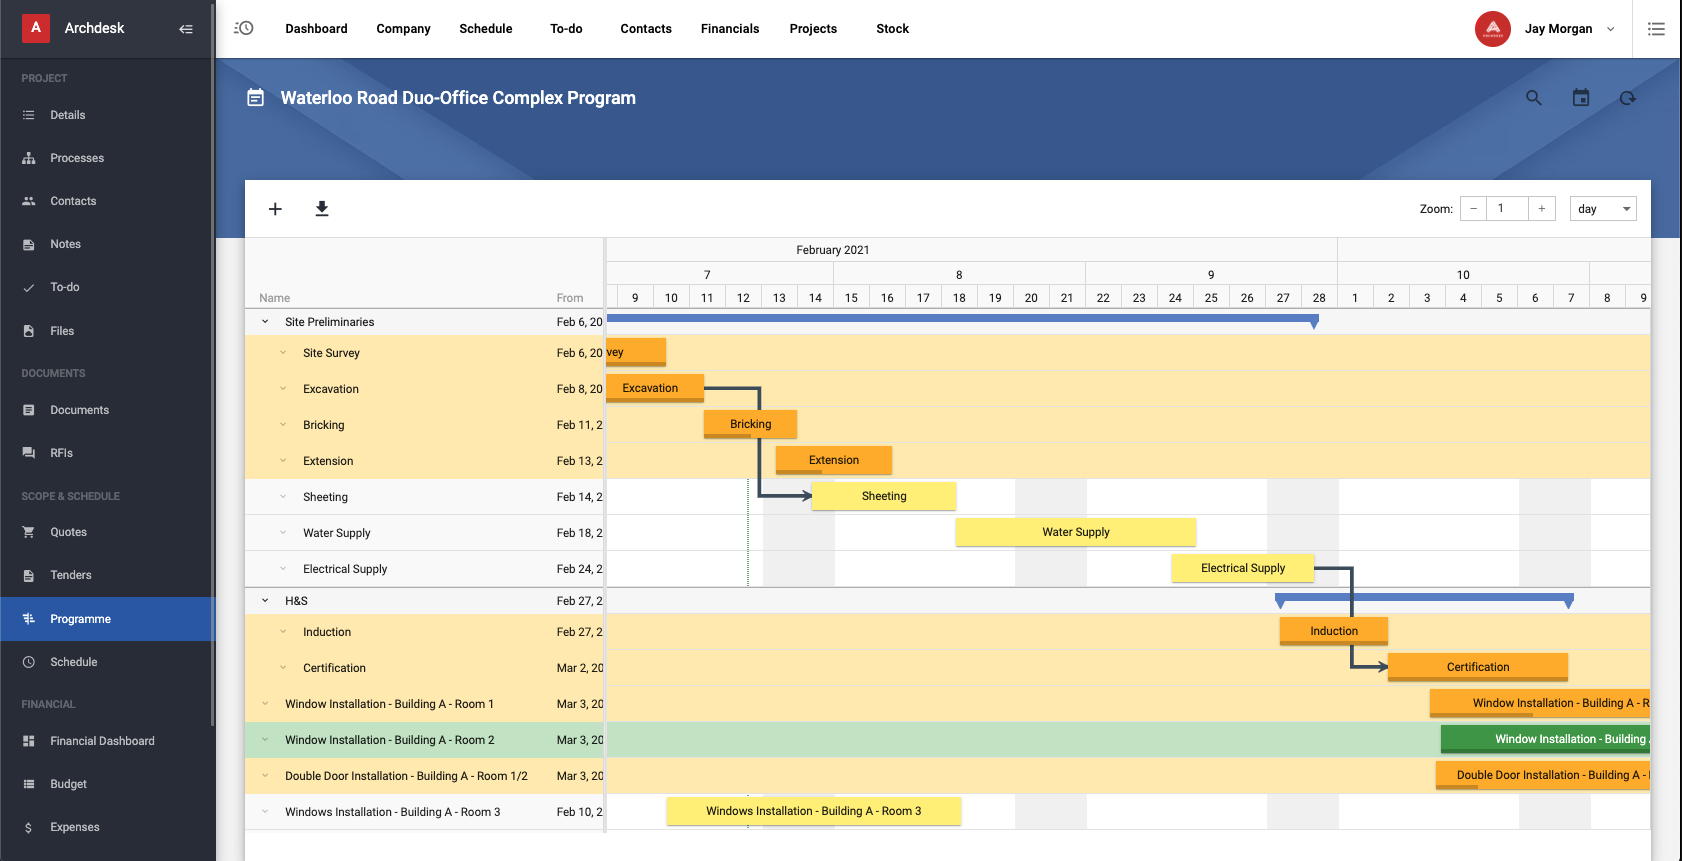 Create a well planned programme of works for your projects, manage scheduled construction tasks, resources, responsibilities, tasks, and more. Use the Gantt chart view to see your projects outview, ensuring optimisation of resources, time, and costs.